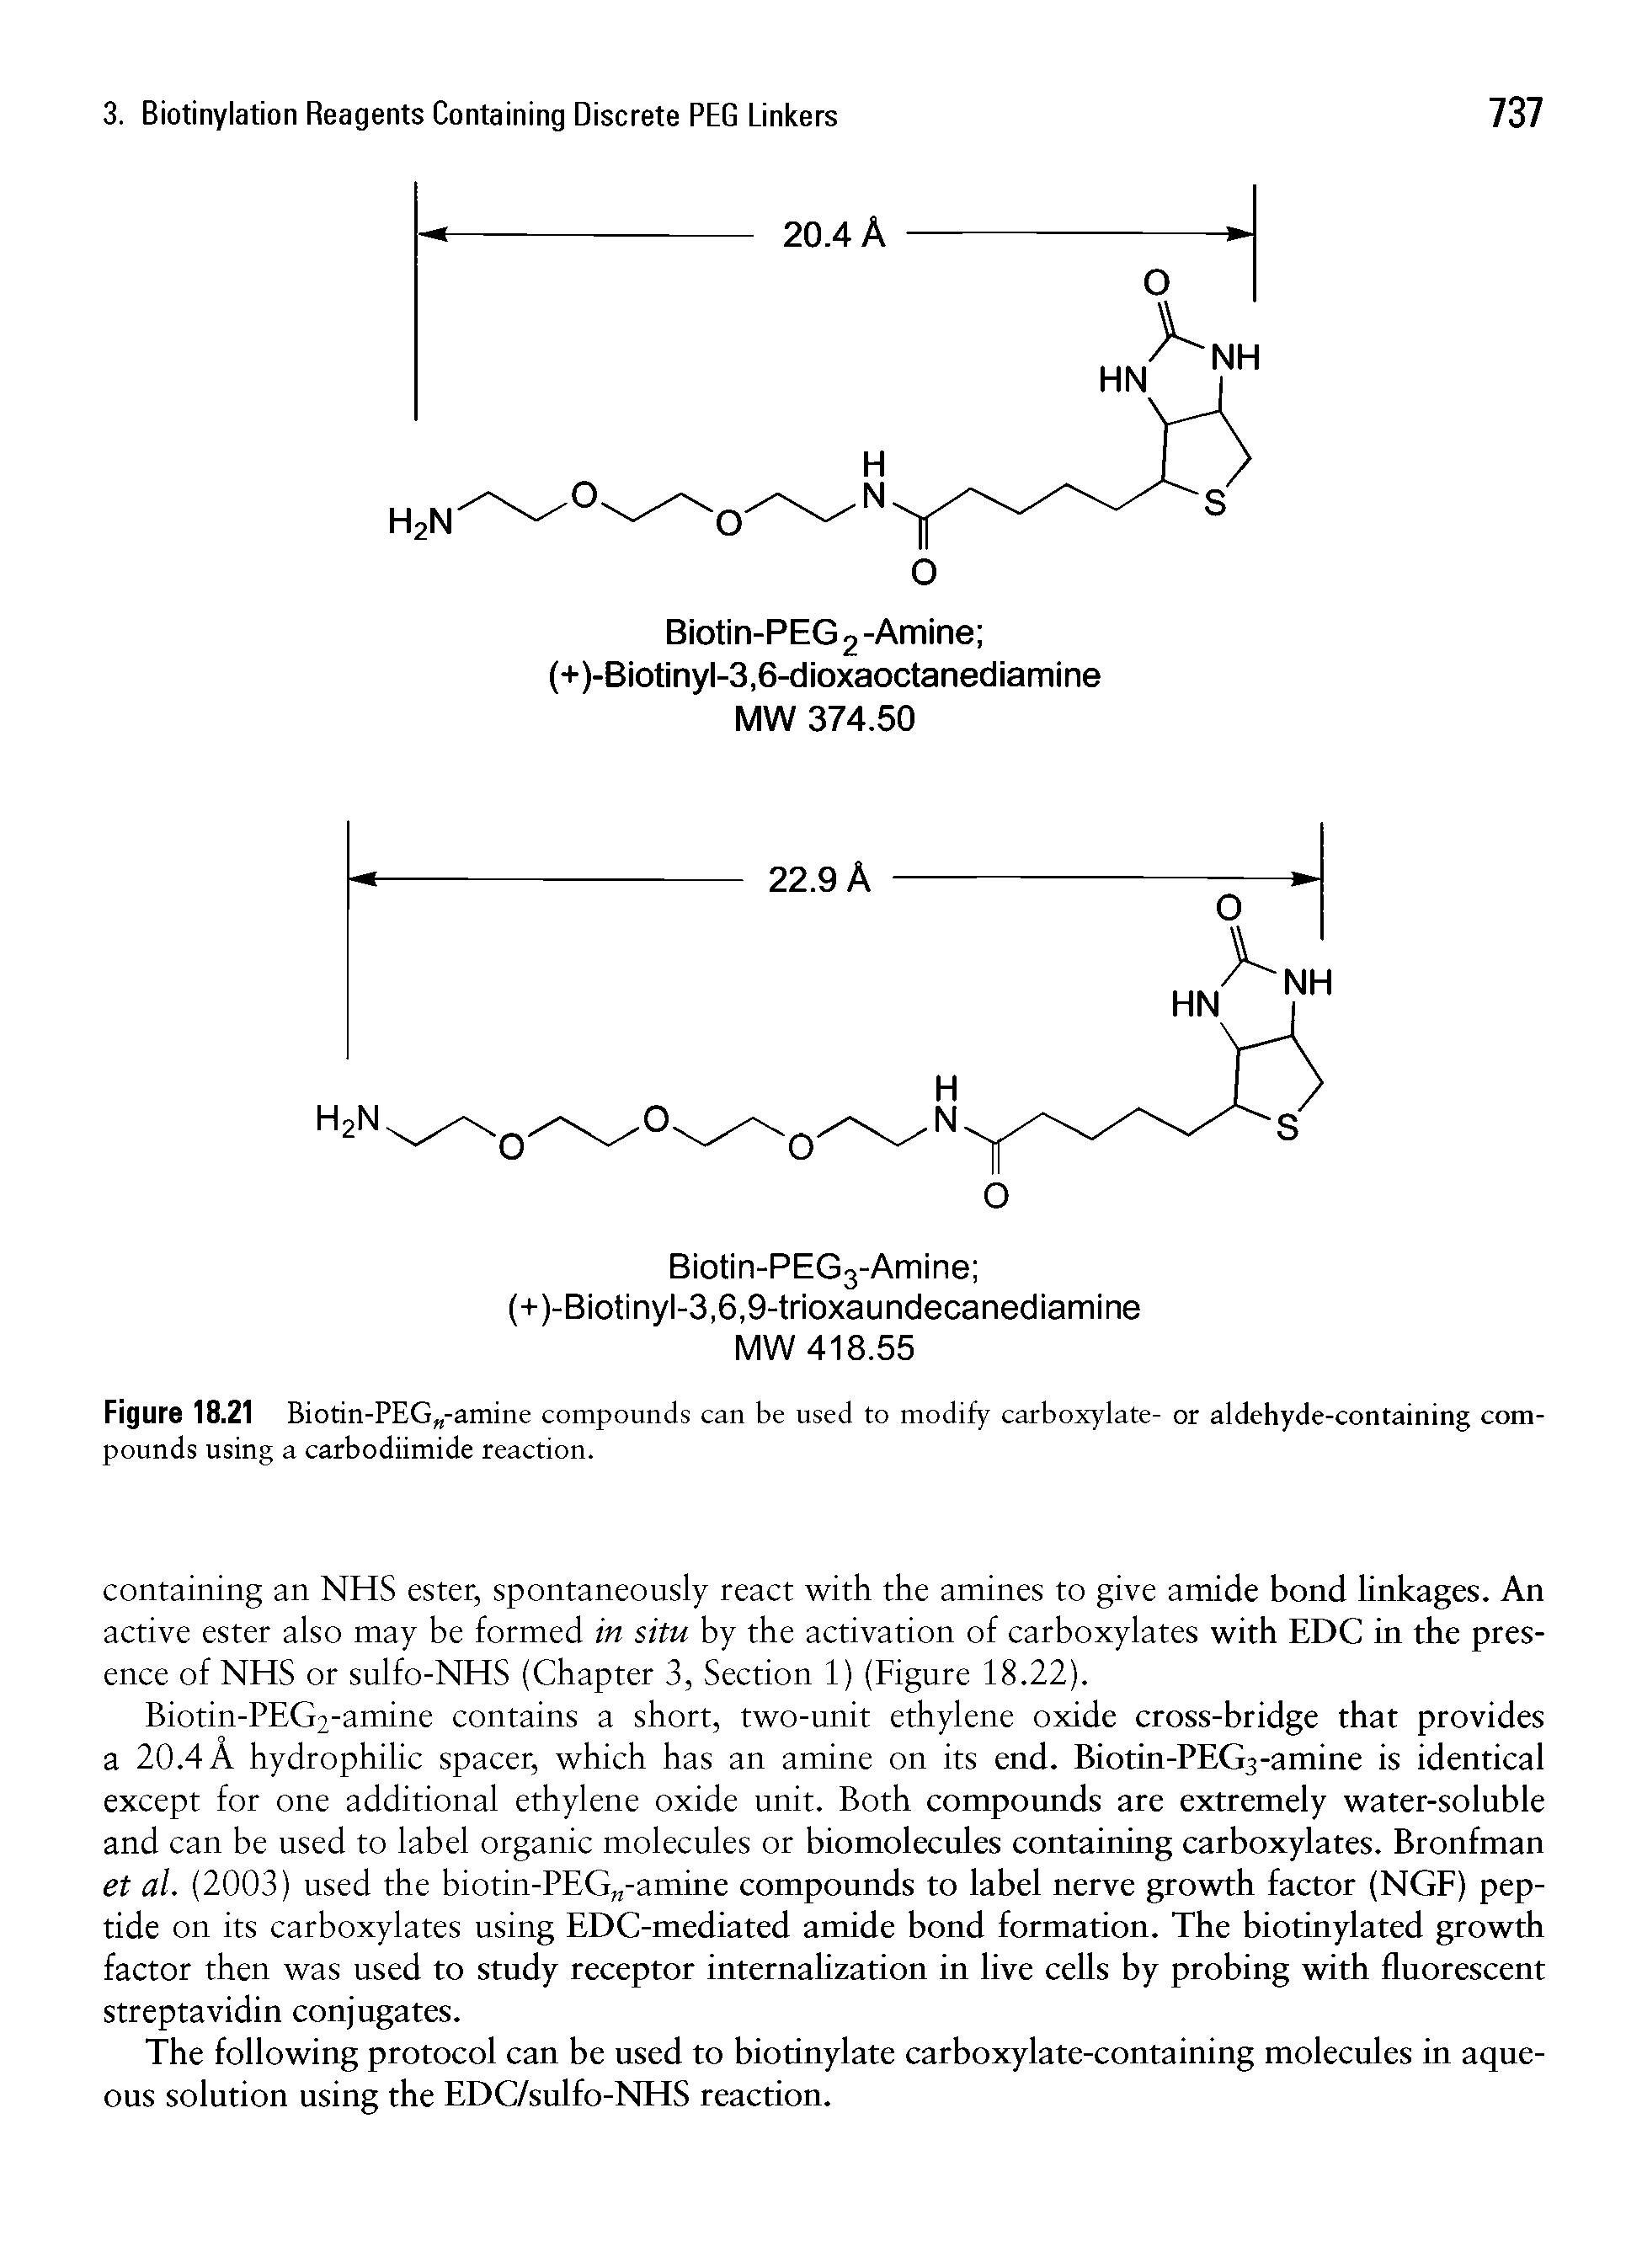 Figure 18.21 Biotin-PEG -amine compounds can be used to modify carboxylate- or aldehyde-containing compounds using a carbodiimide reaction.